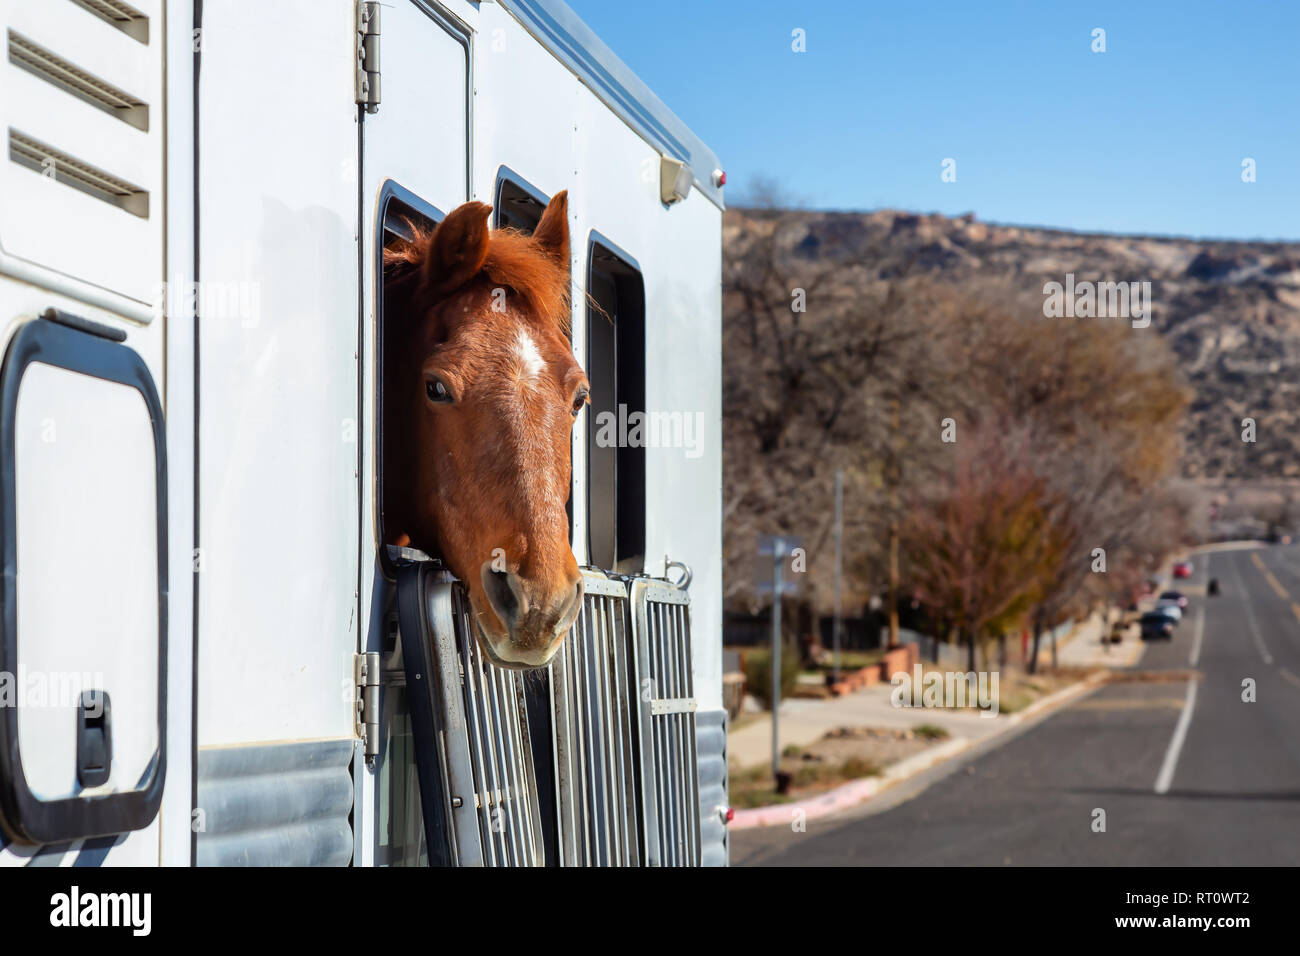 Horse looking out from a window during a sunny day. Taken in Escalante, Utah, United States. Stock Photo